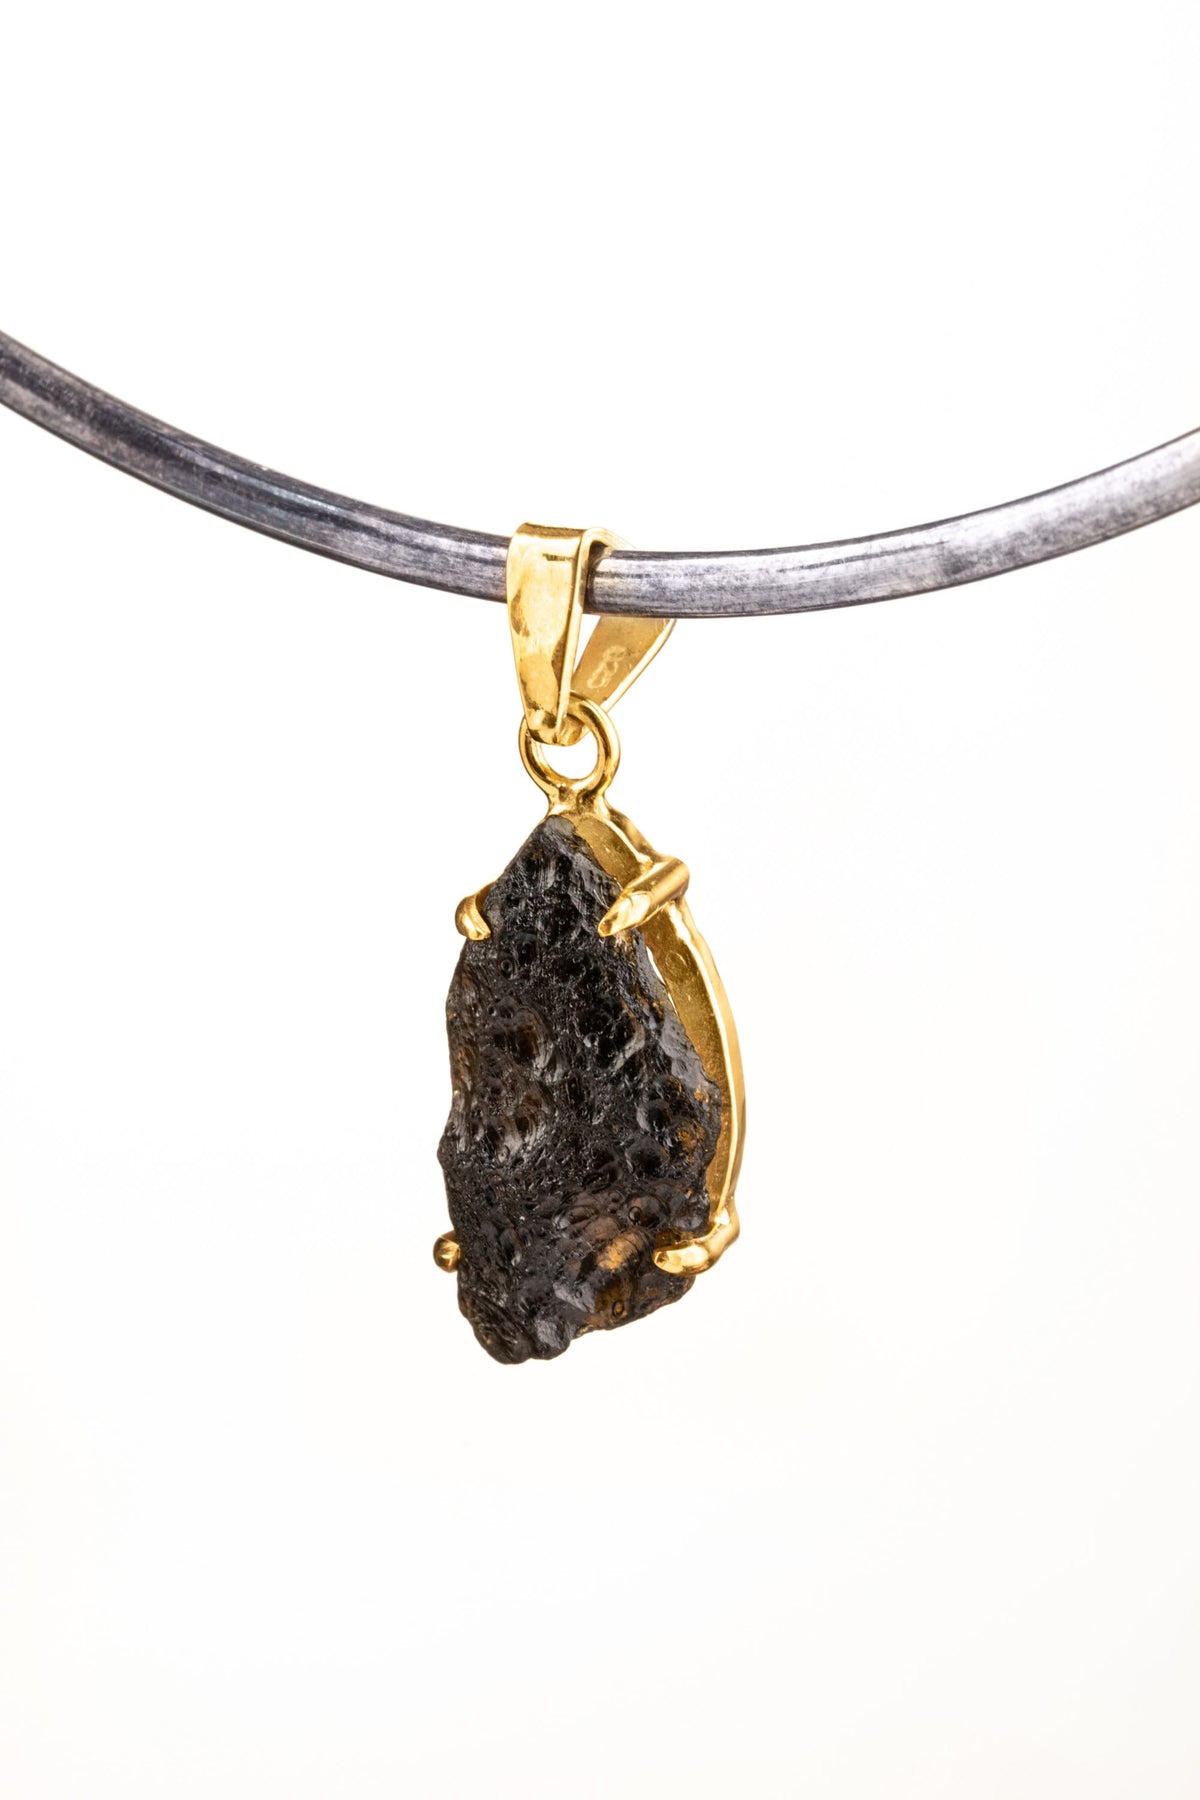 Rare Natural Darwin Glass Tektite - 925 Sterling Silver Gold Plated - Hammered Textured Claw Setting - Pendant Neckpiece No7